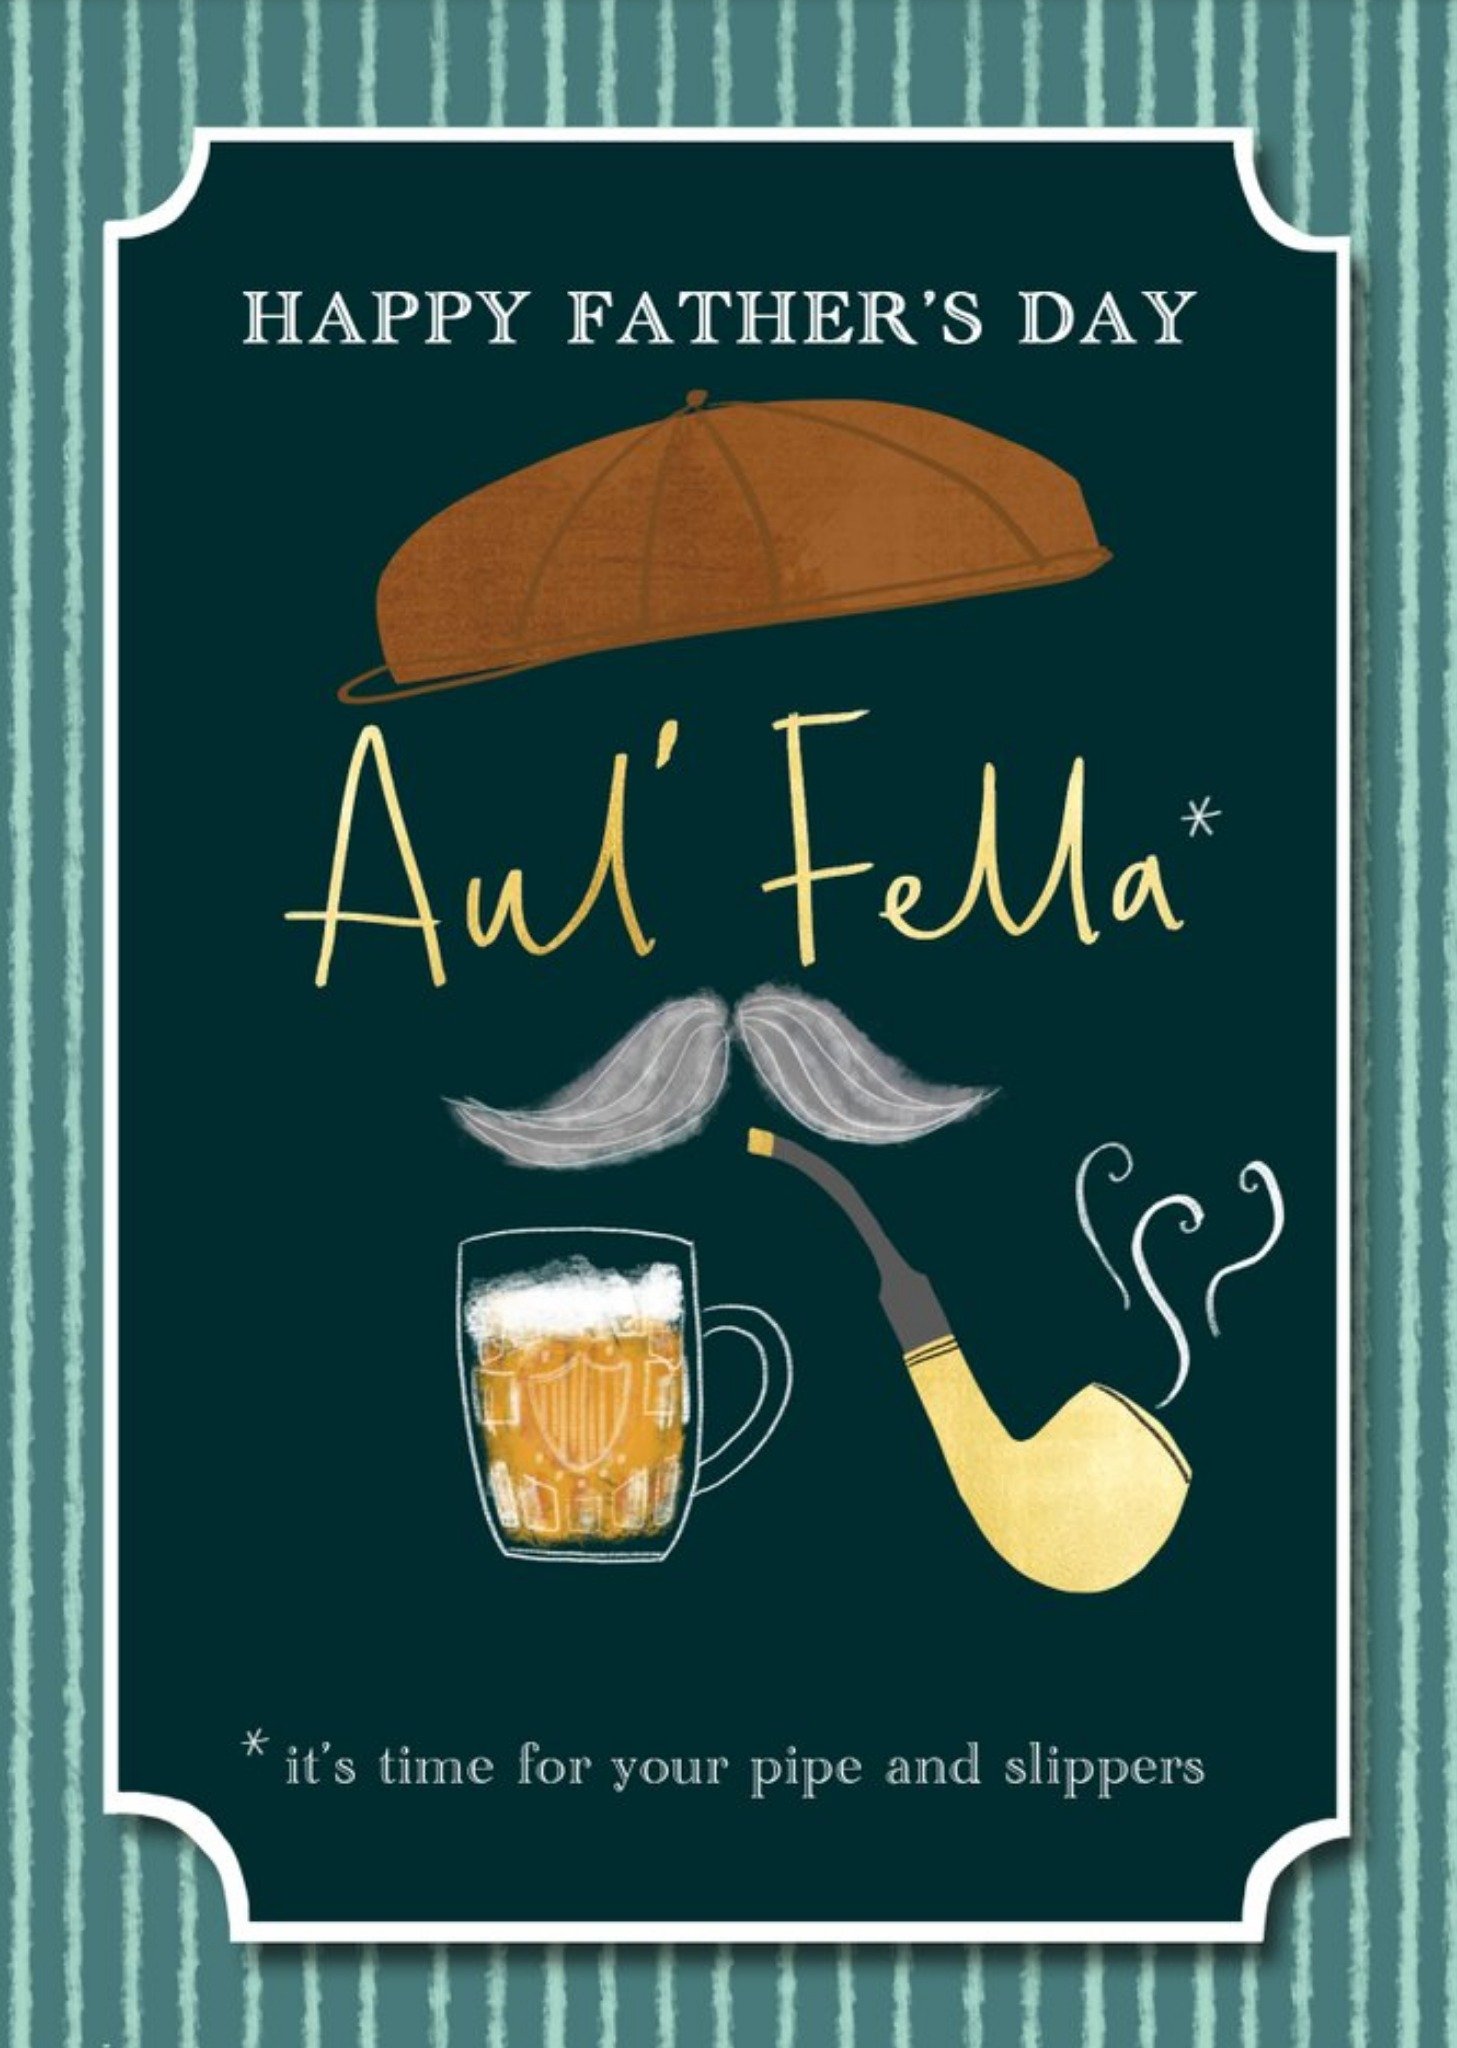 Moonpig Funny Illustrated Aul Fella Father's Day Card Ecard